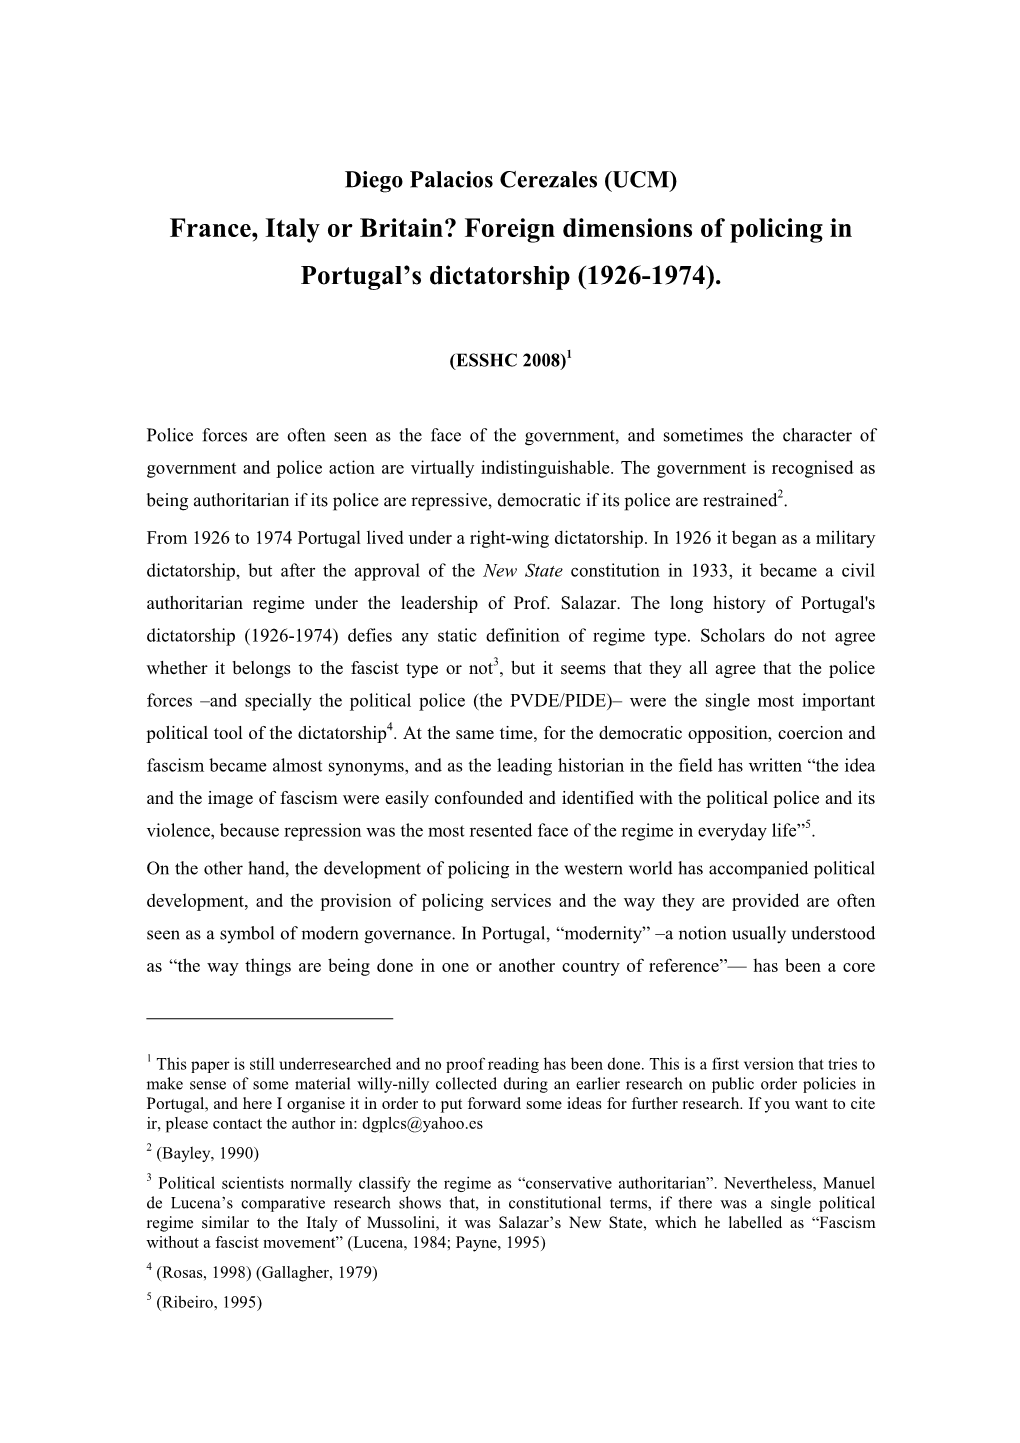 Foreign Dimensions of Policing in Portugal's Dictatorship (1926-1974)